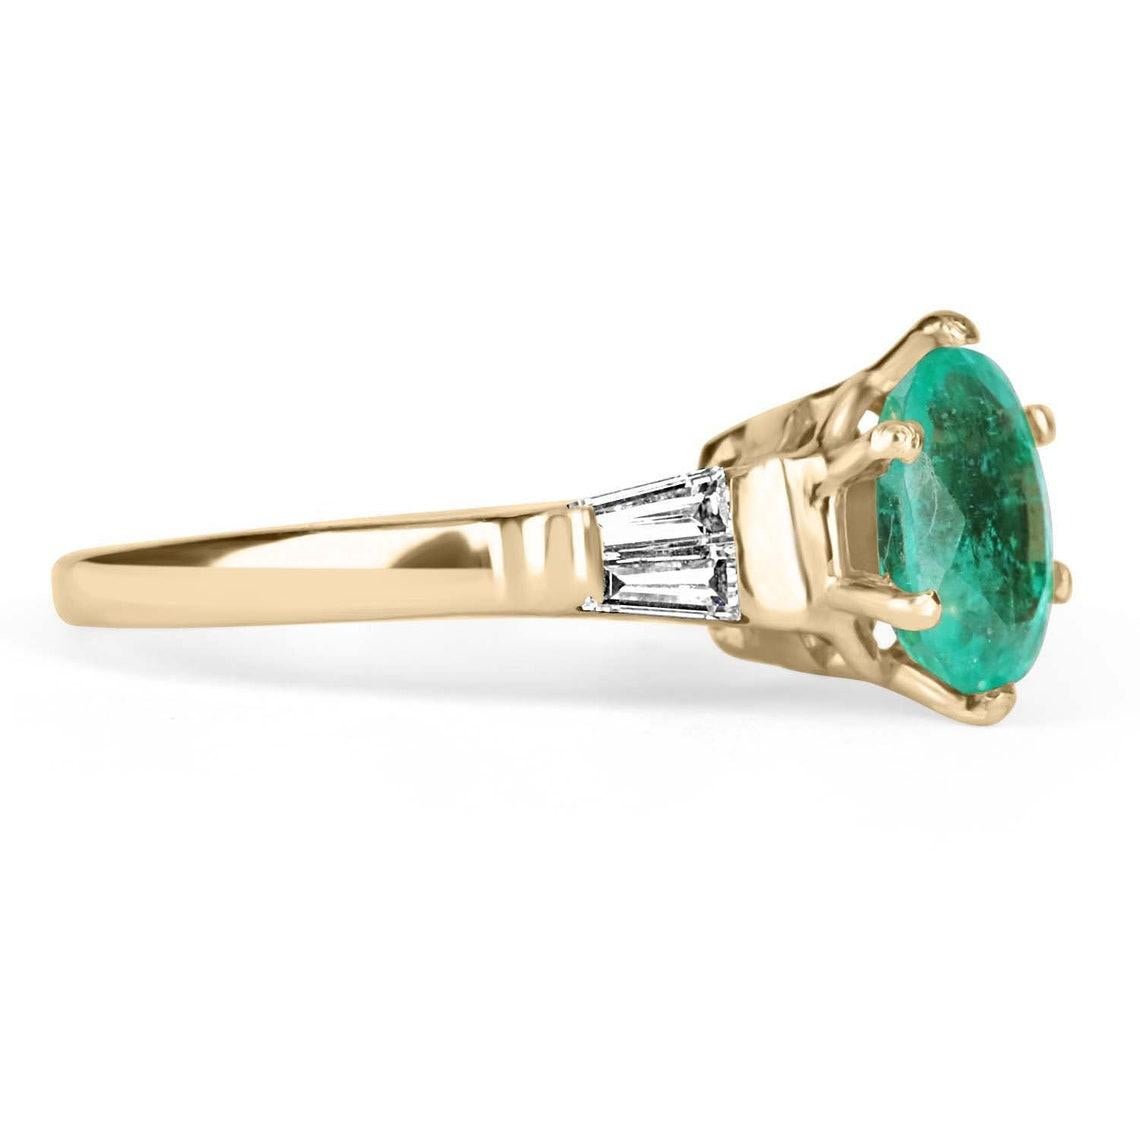 An extraordinary oval Colombian emerald and diamond ring. Crafted in gleaming 14K yellow gold, this ring features a vivacious, 2.13-carat natural oval Colombian emerald from the famous Muzo mines. Set in a secure six-prong setting, this emerald has